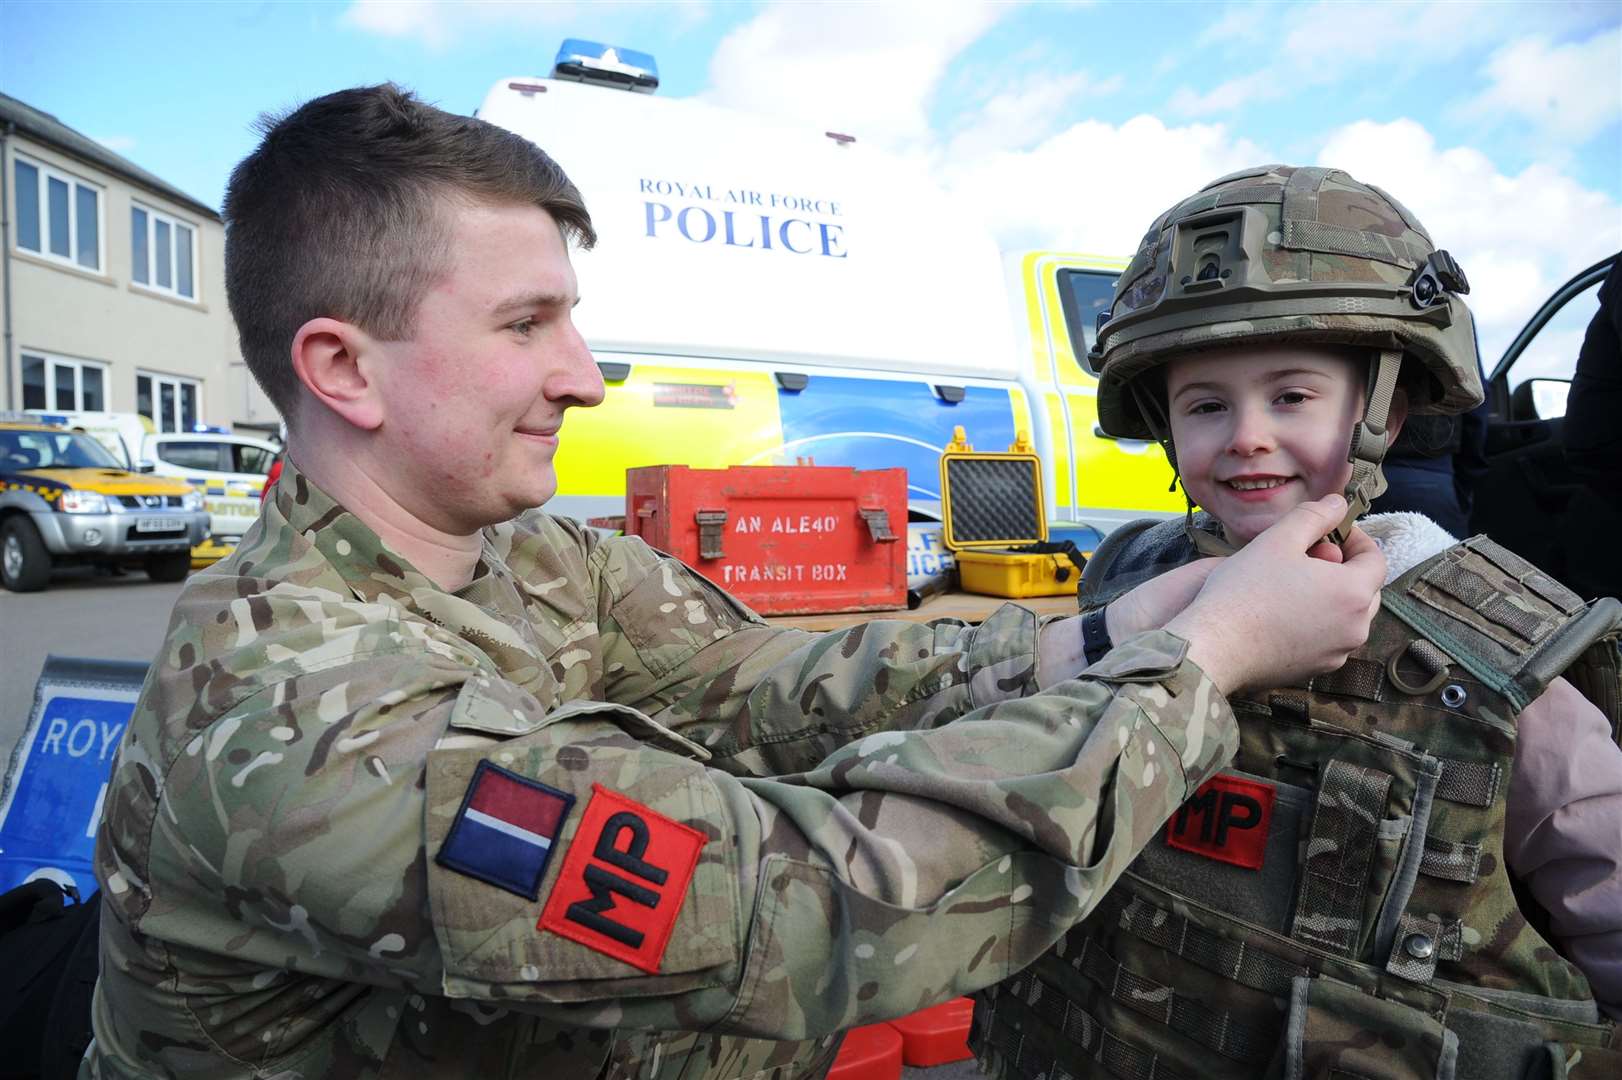 Ruby Williamson gets kitted out by RAF Police Cpl Ollie Jewers at the festival in 2019.